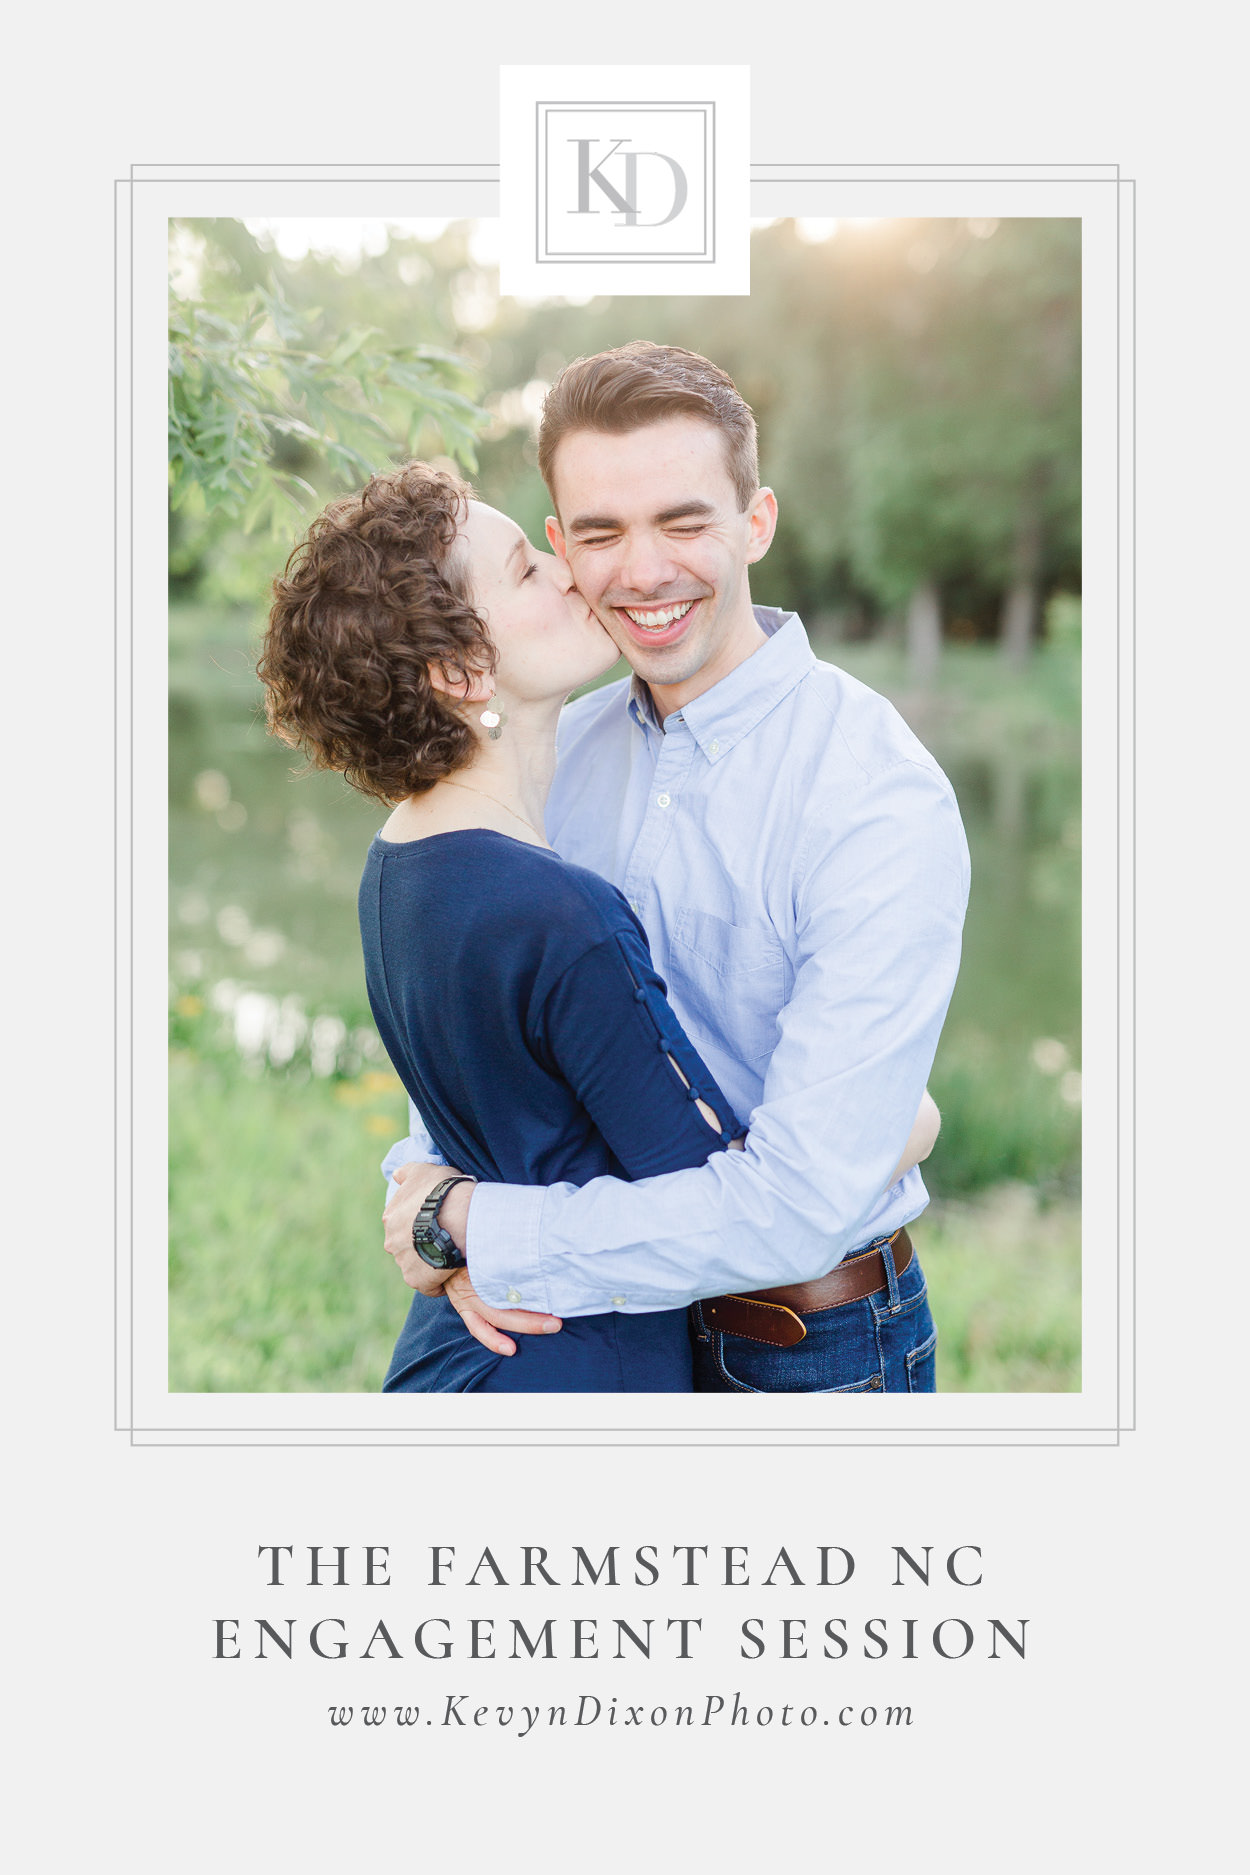 The Farmstead NC Engagement Session